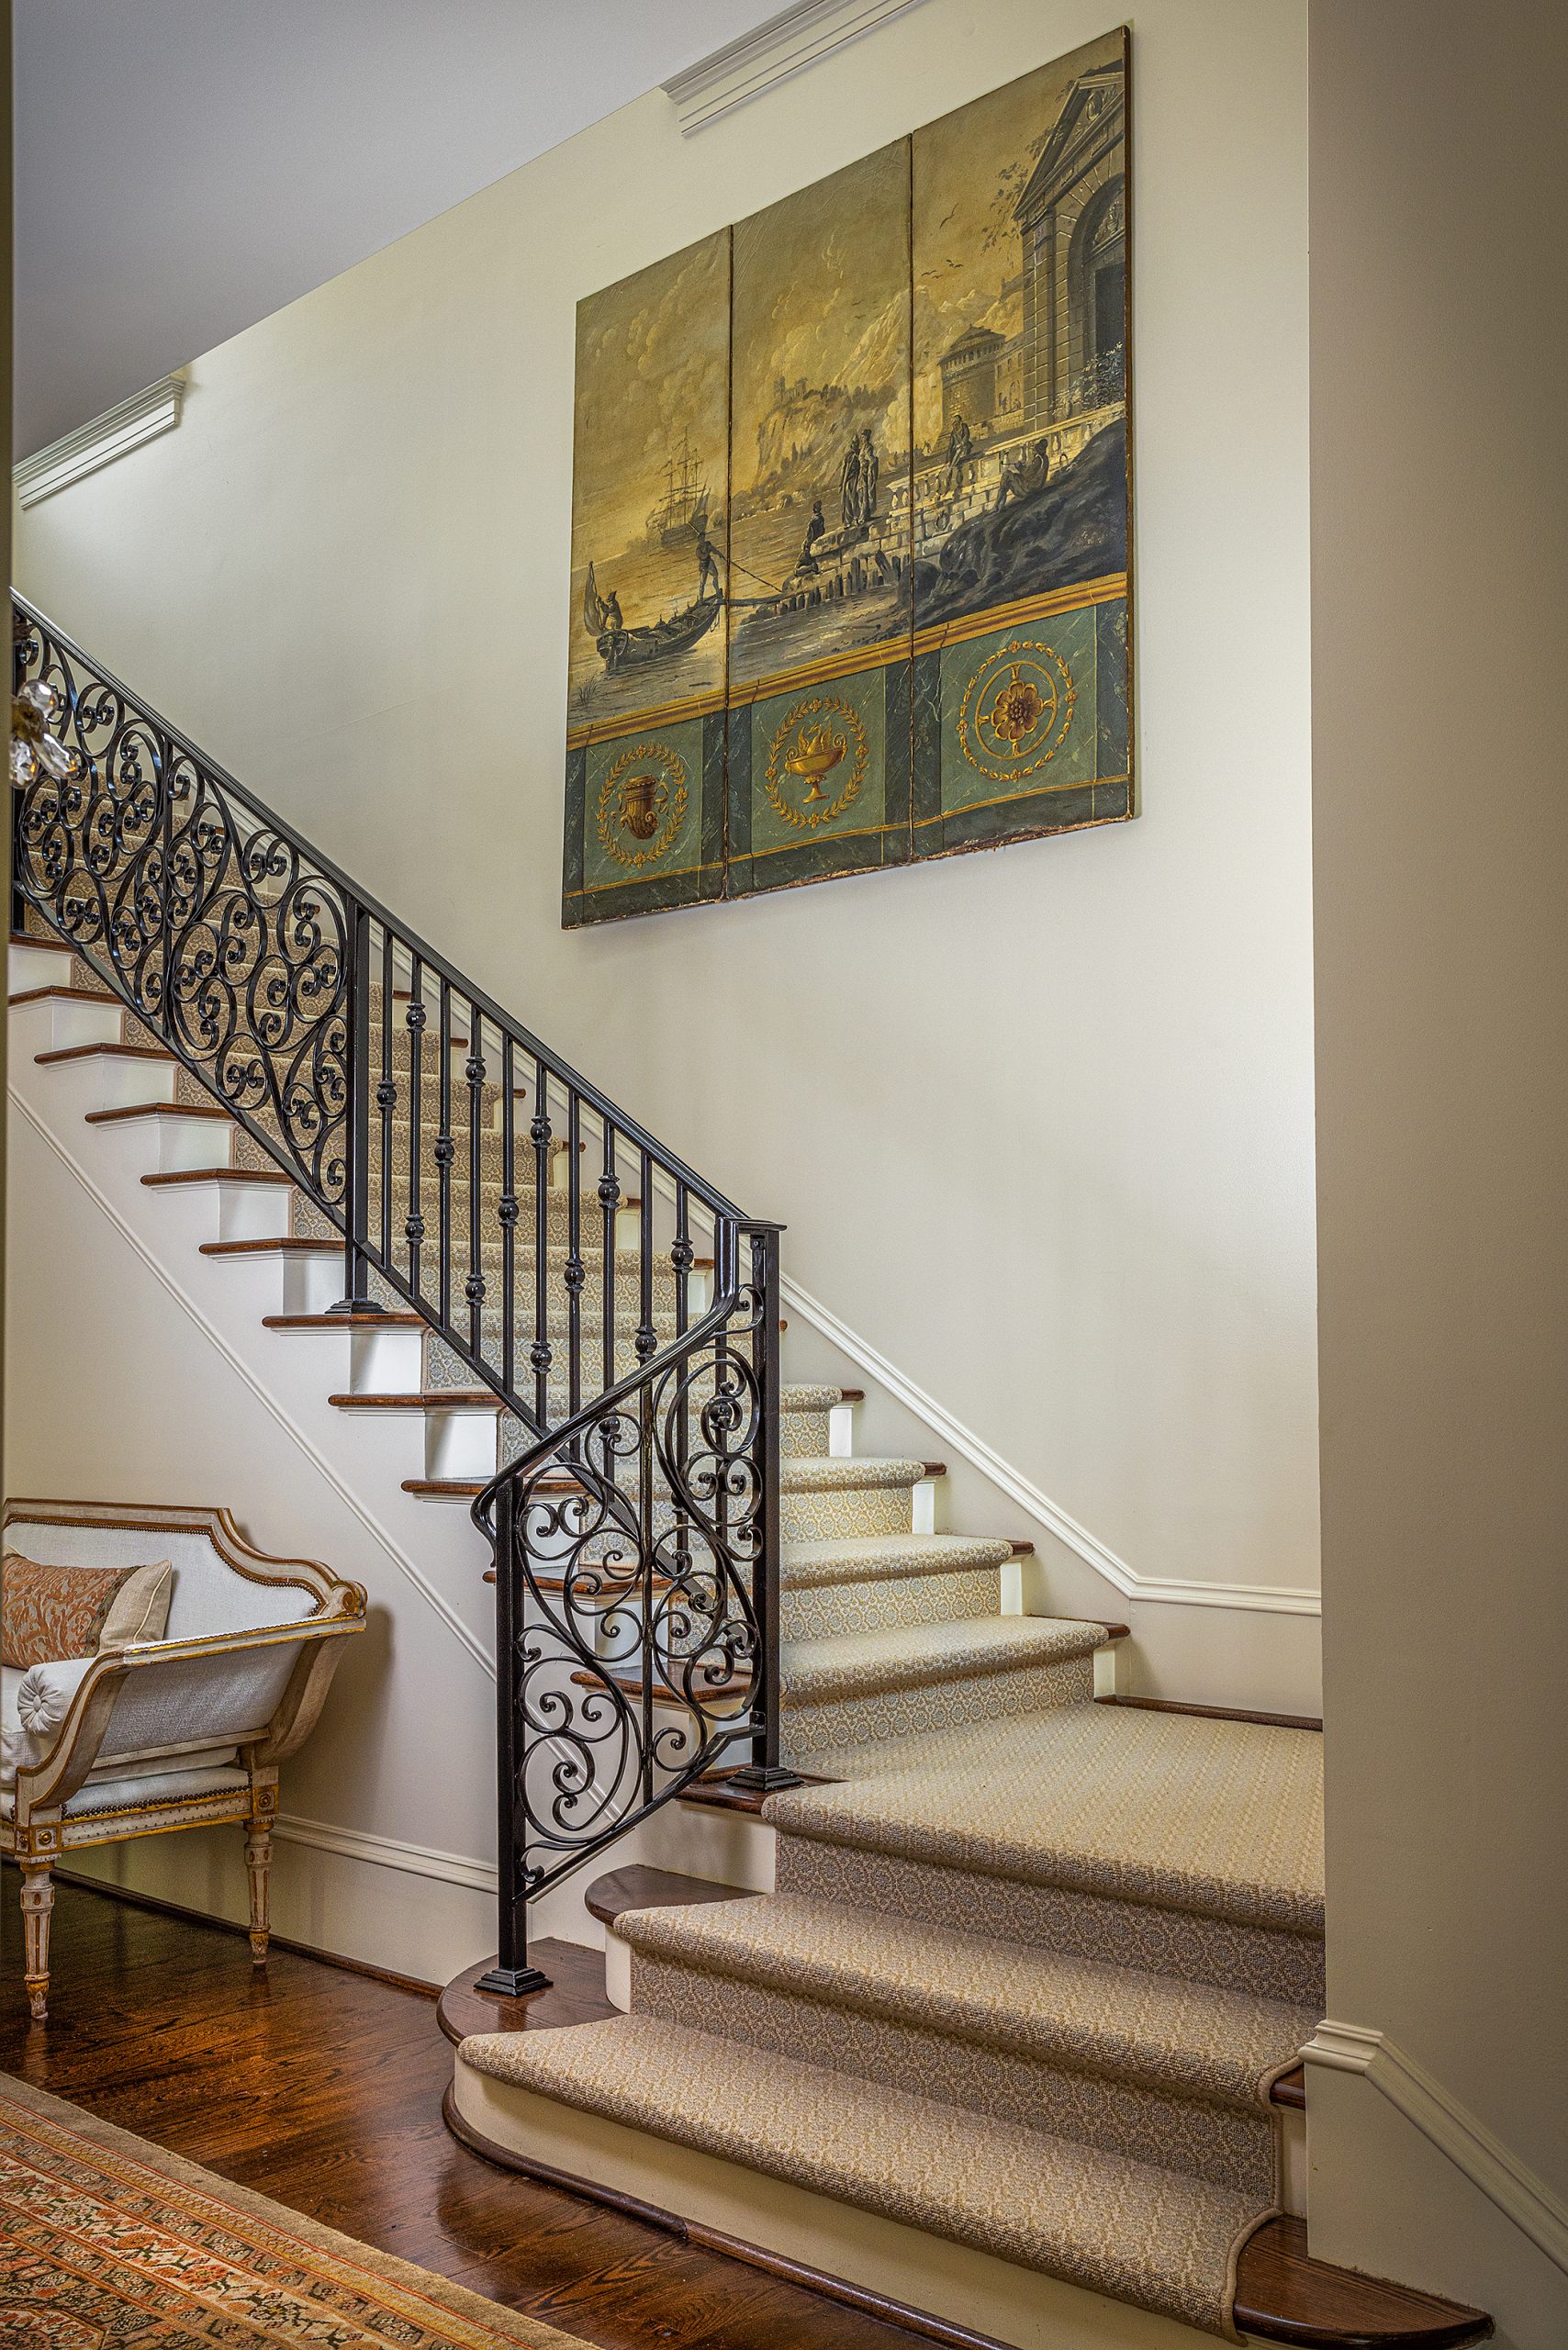 The antique screen in the stairwell was a recent find of Marion’s while in Charleston; it marries perfectly with the stairwell.  
